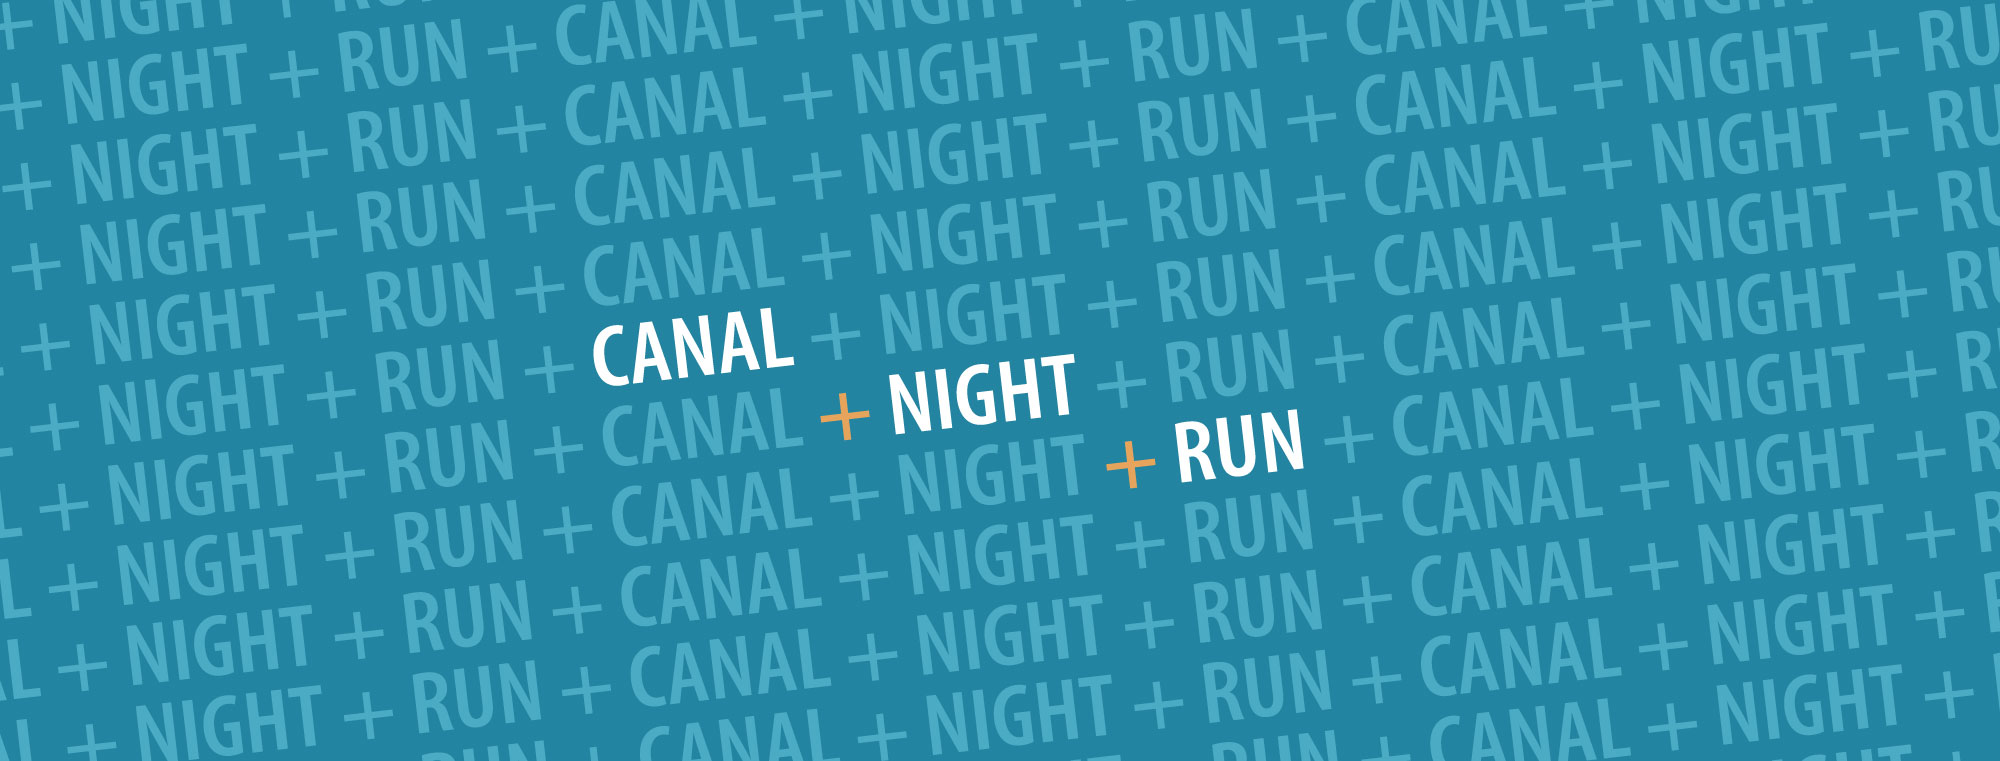 Share The Night Run with your Network